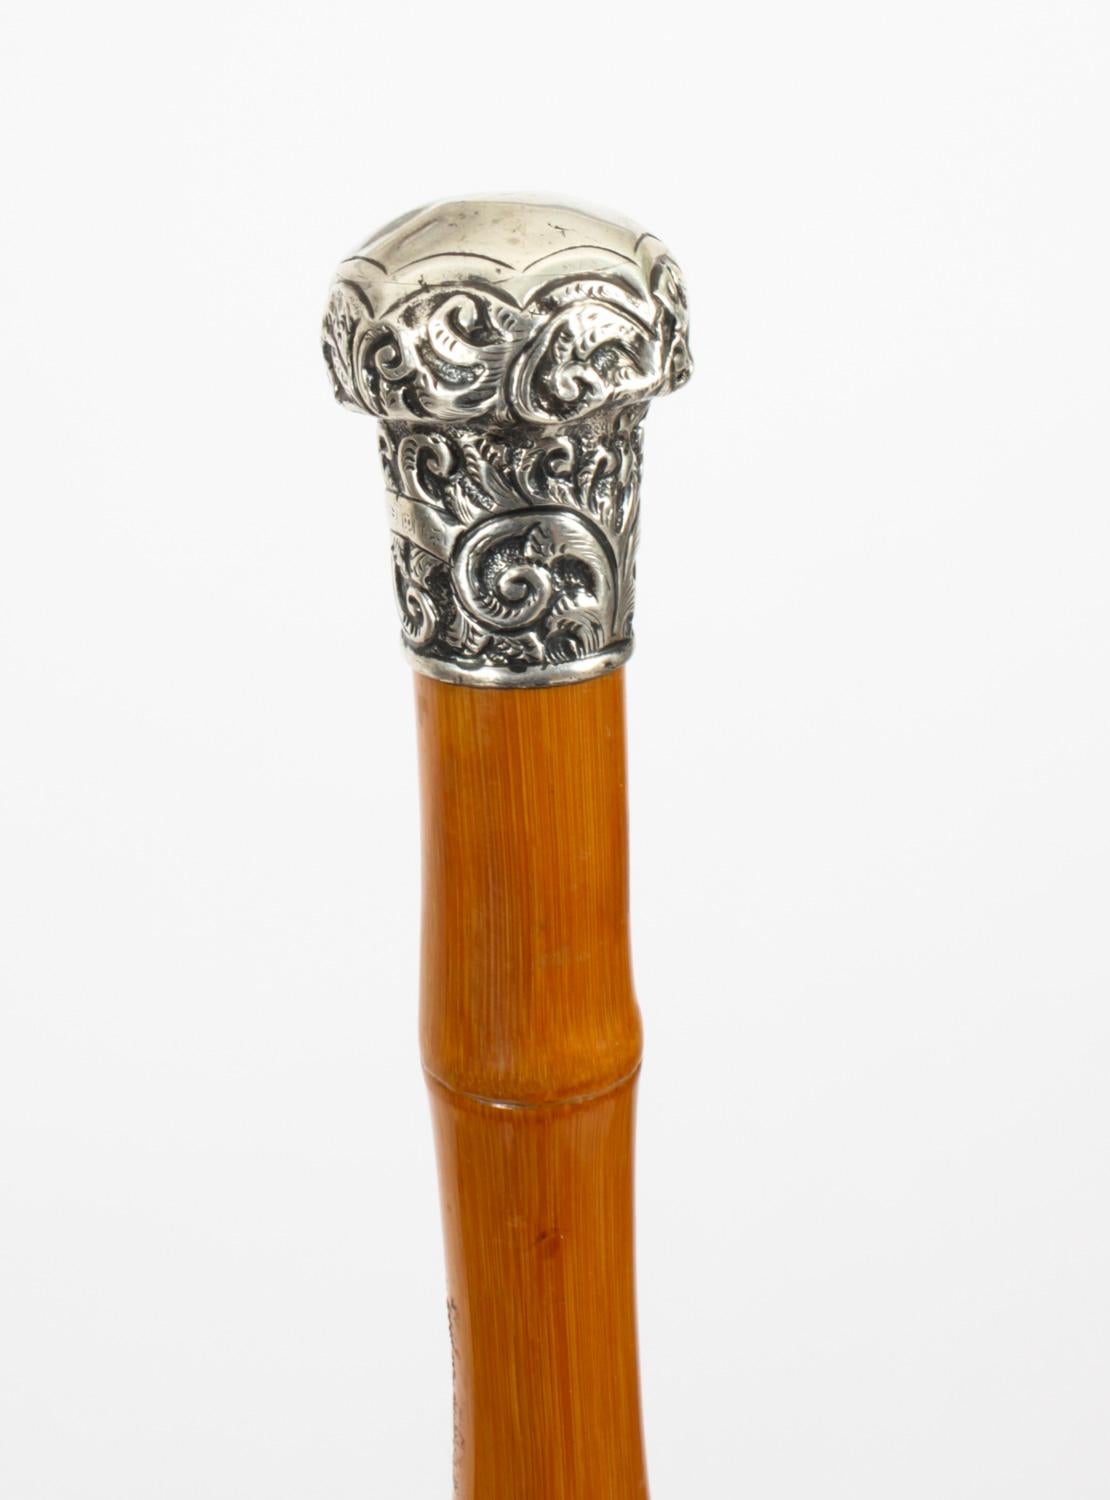 This is a beautiful antique gentleman's silver pommel and bambo shaft walking stick, circa 1880 in date.
 
This decorative walking cane features an exquisite silver pommel decorated with exquisitely cast foliate and floral ornamentation.
 
It